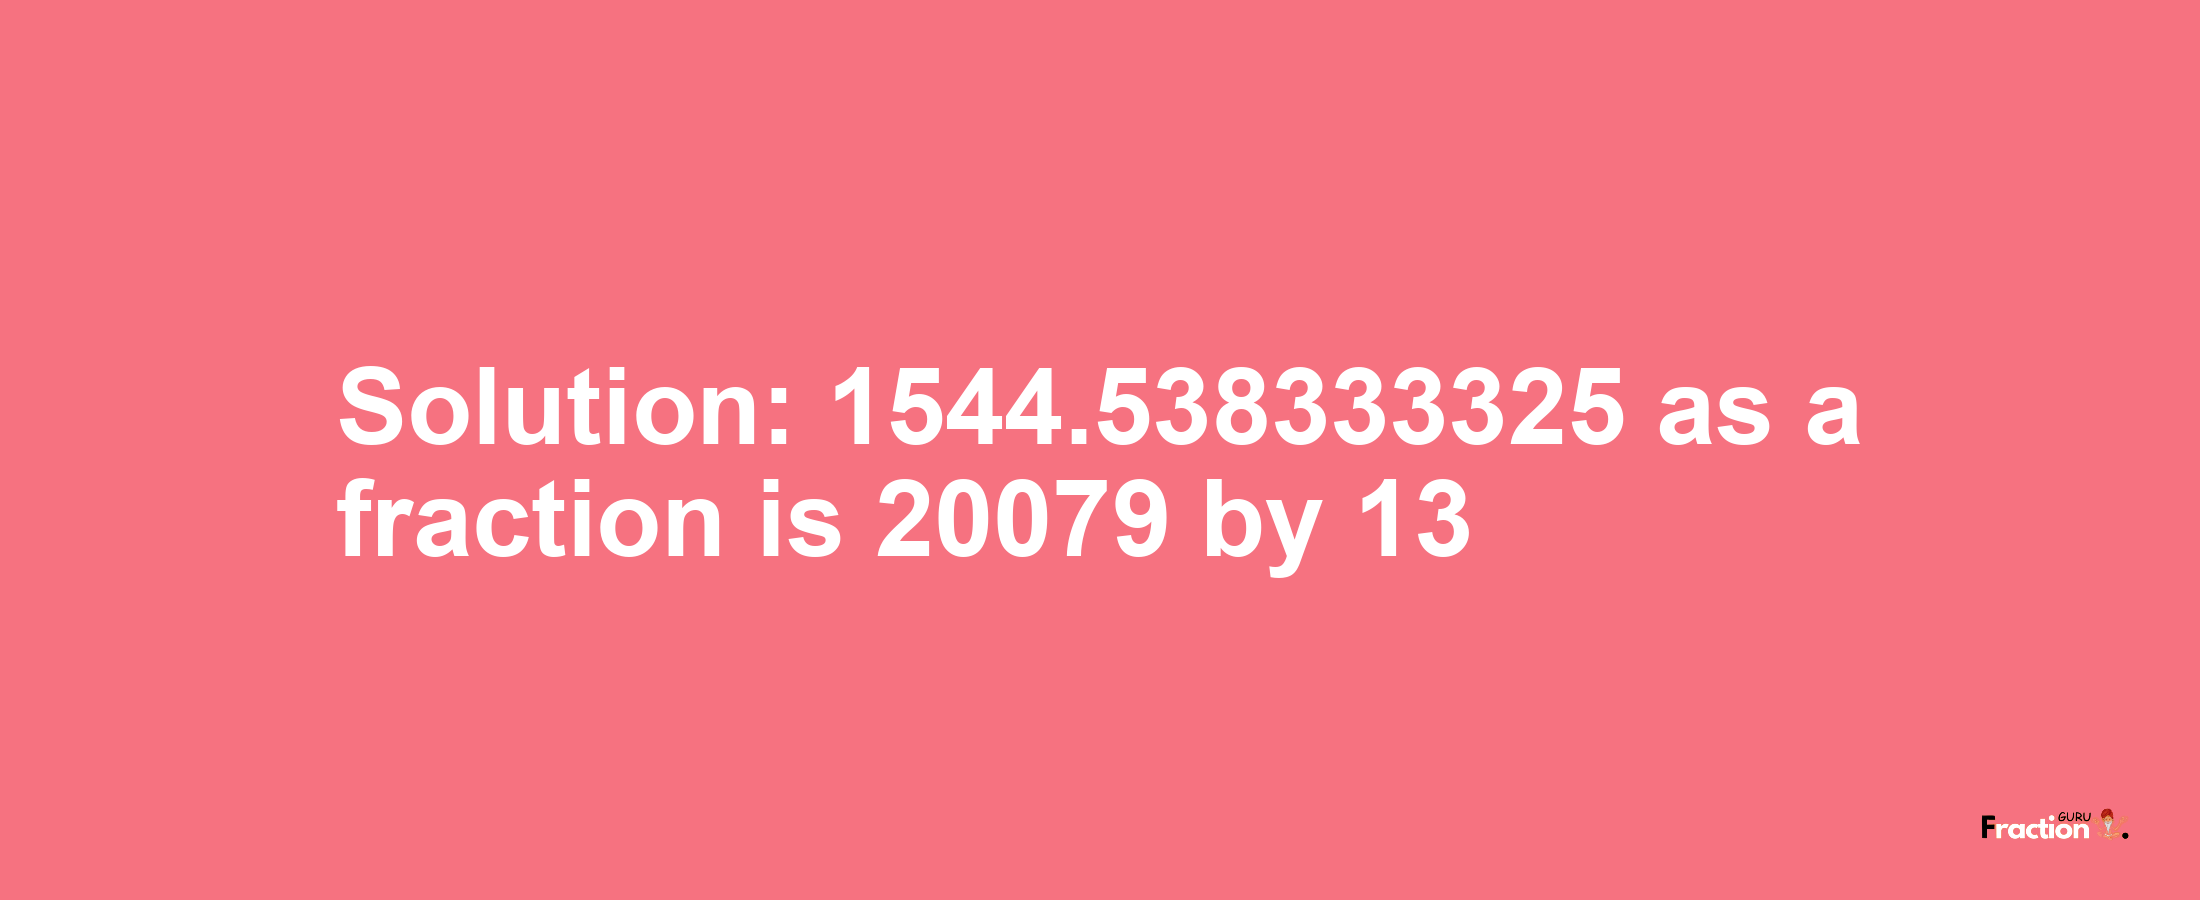 Solution:1544.538333325 as a fraction is 20079/13